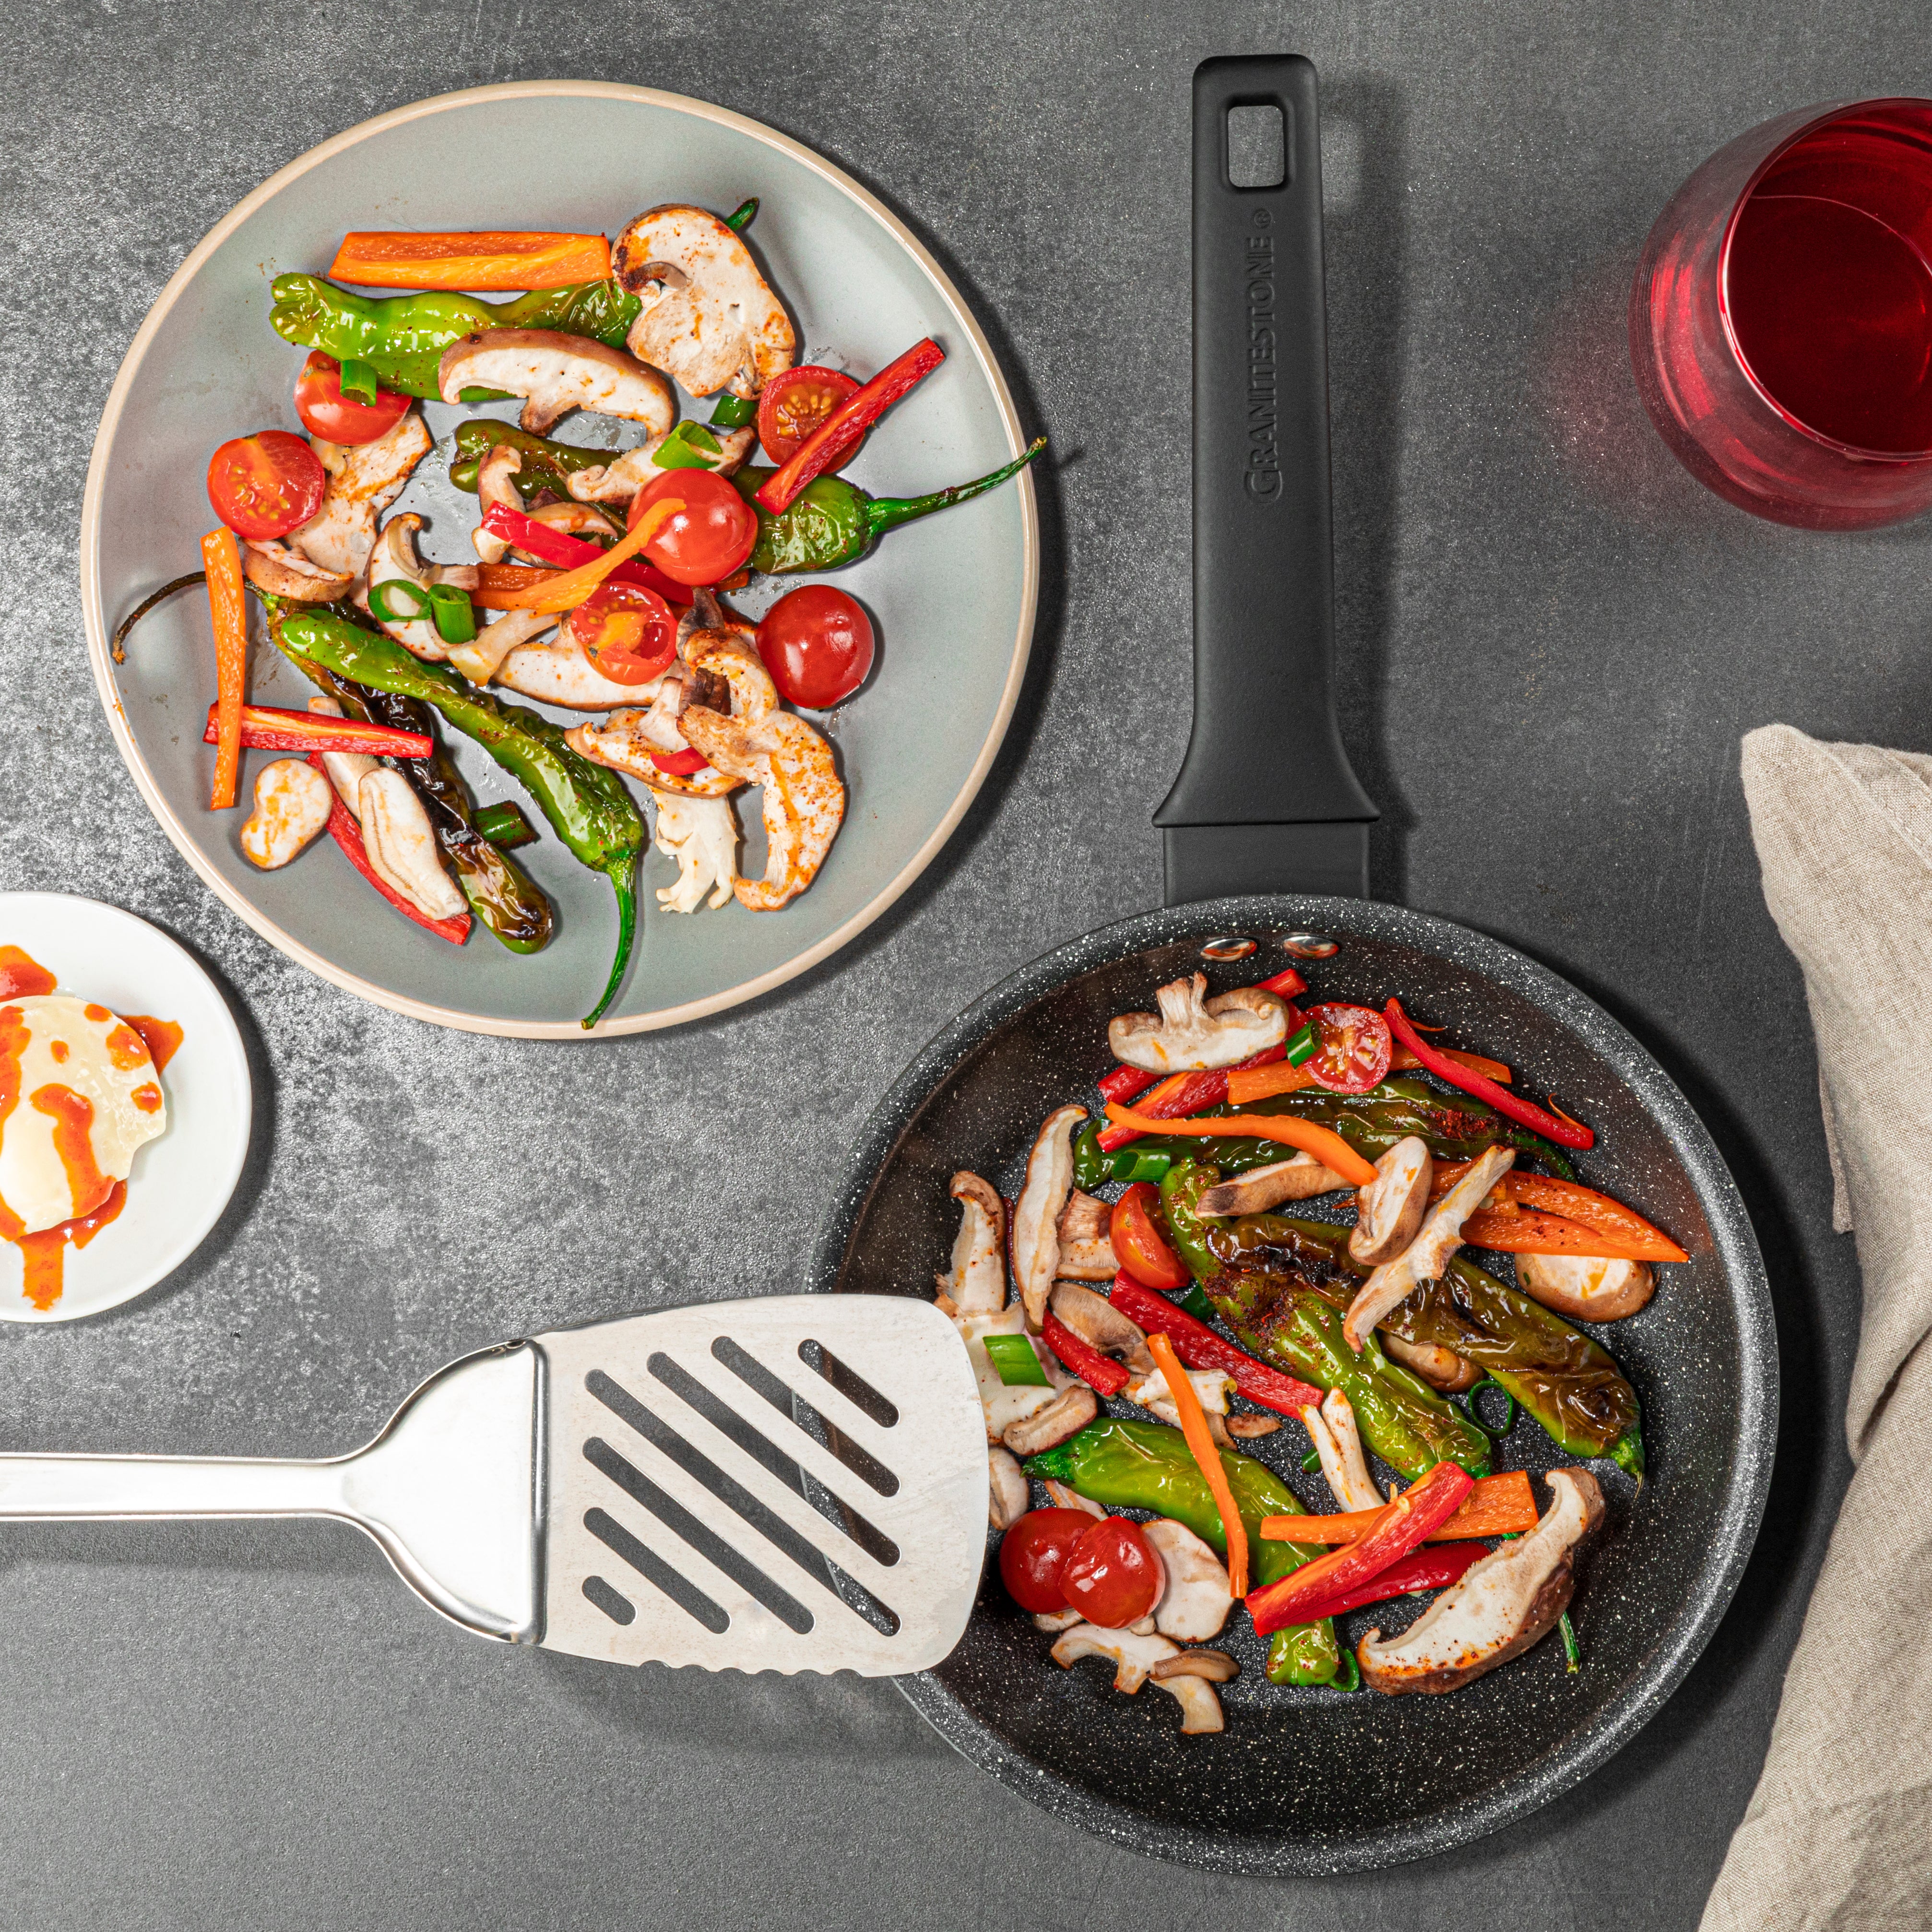 The 5 Best Stone Frying Pans of 2024 ( Reviewed ) -Best Stone Cookware 